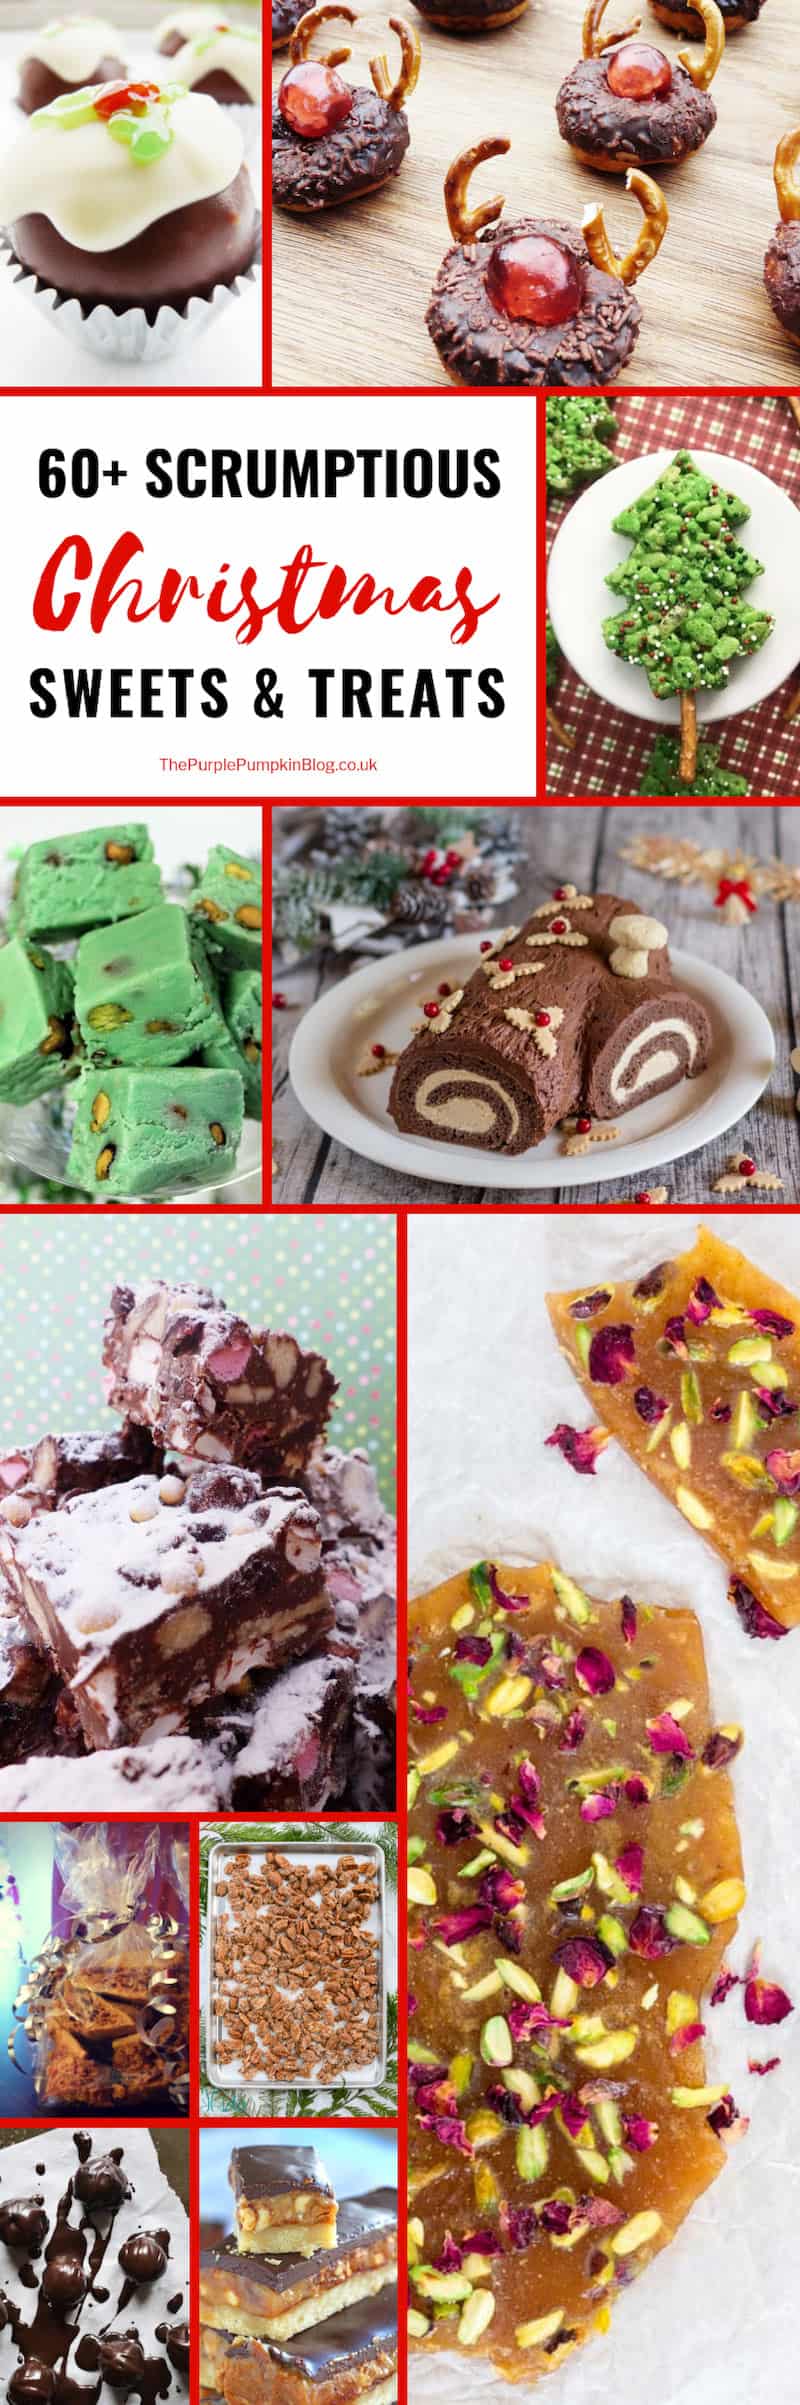 Christmas is a time to eat, drink and be merry, and there are 60+ Scrumptious Christmas Sweets + Treats to help you on your way! With delicious truffles, fudge, candies, and more! There are also a selection of gluten-free, dairy-free, sugar-free, vegan, paleo, keto, and low-carb recipes so there really is something for everyone to enjoy!